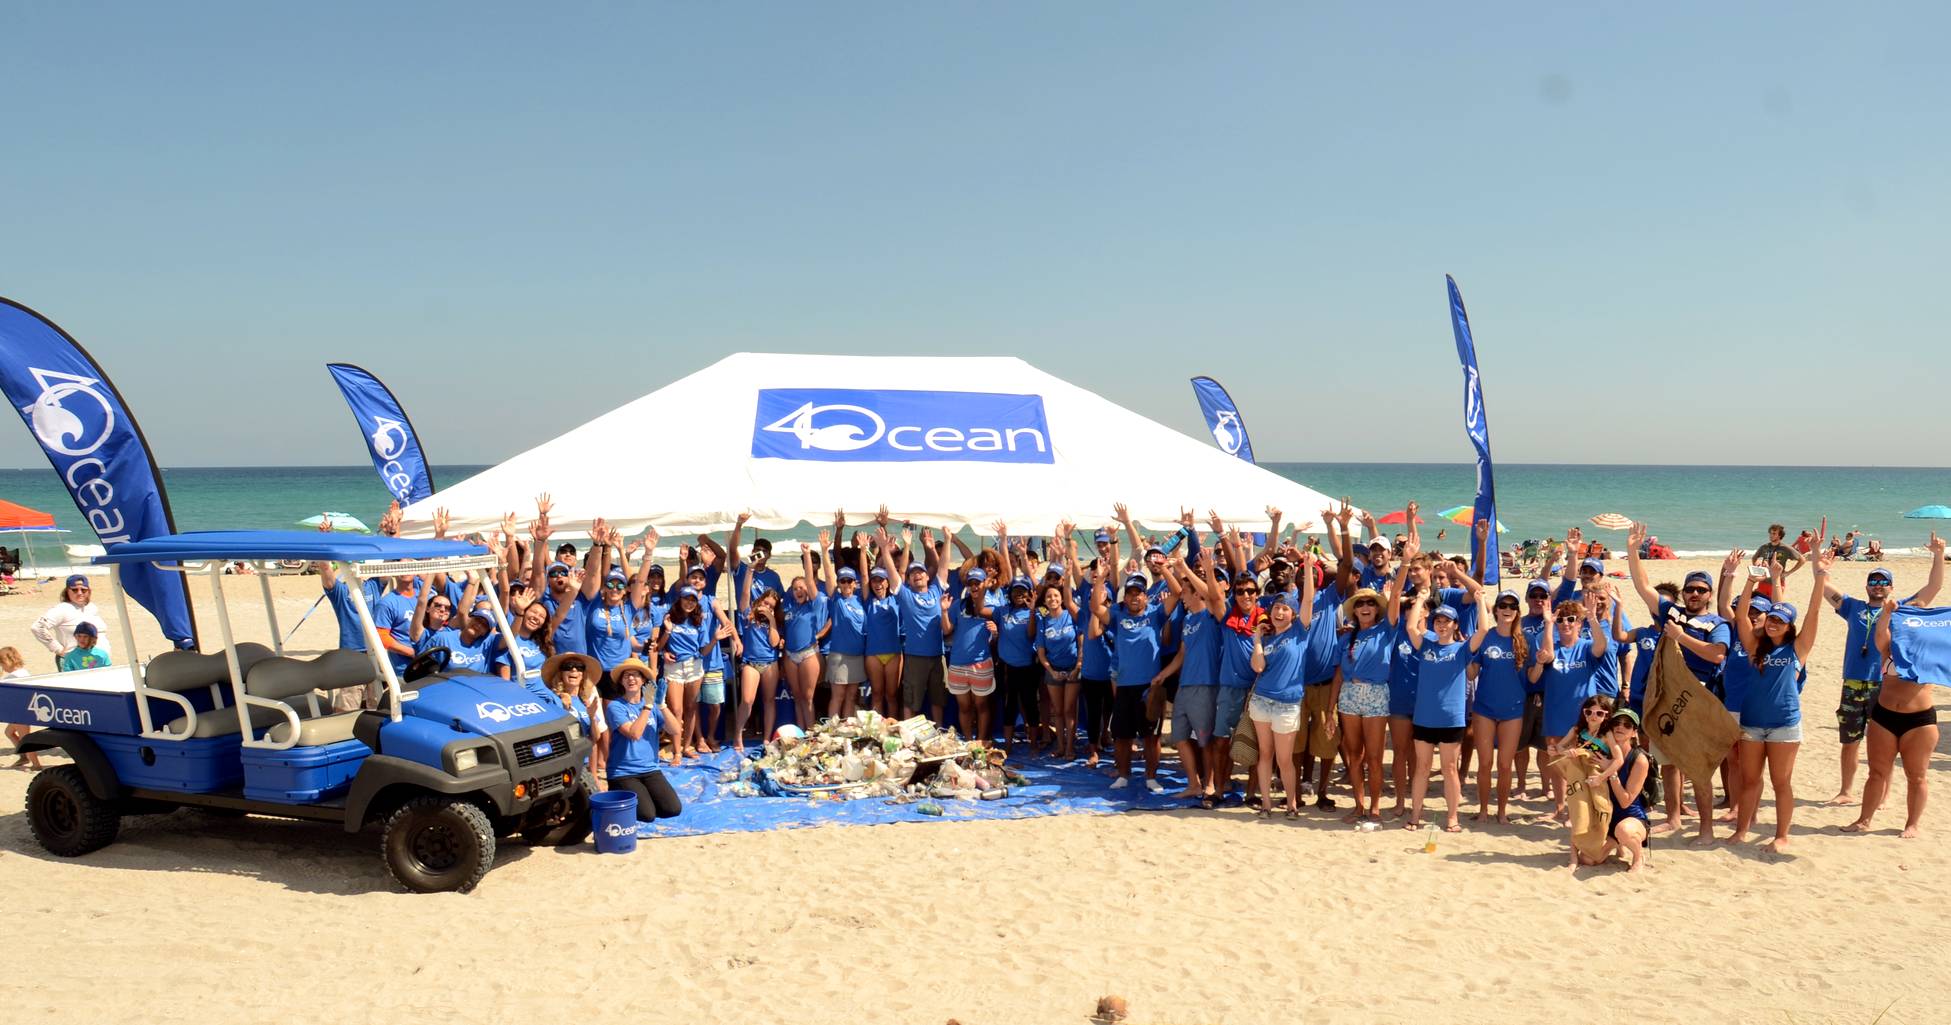 4Ocean group photo beach cleaning operations